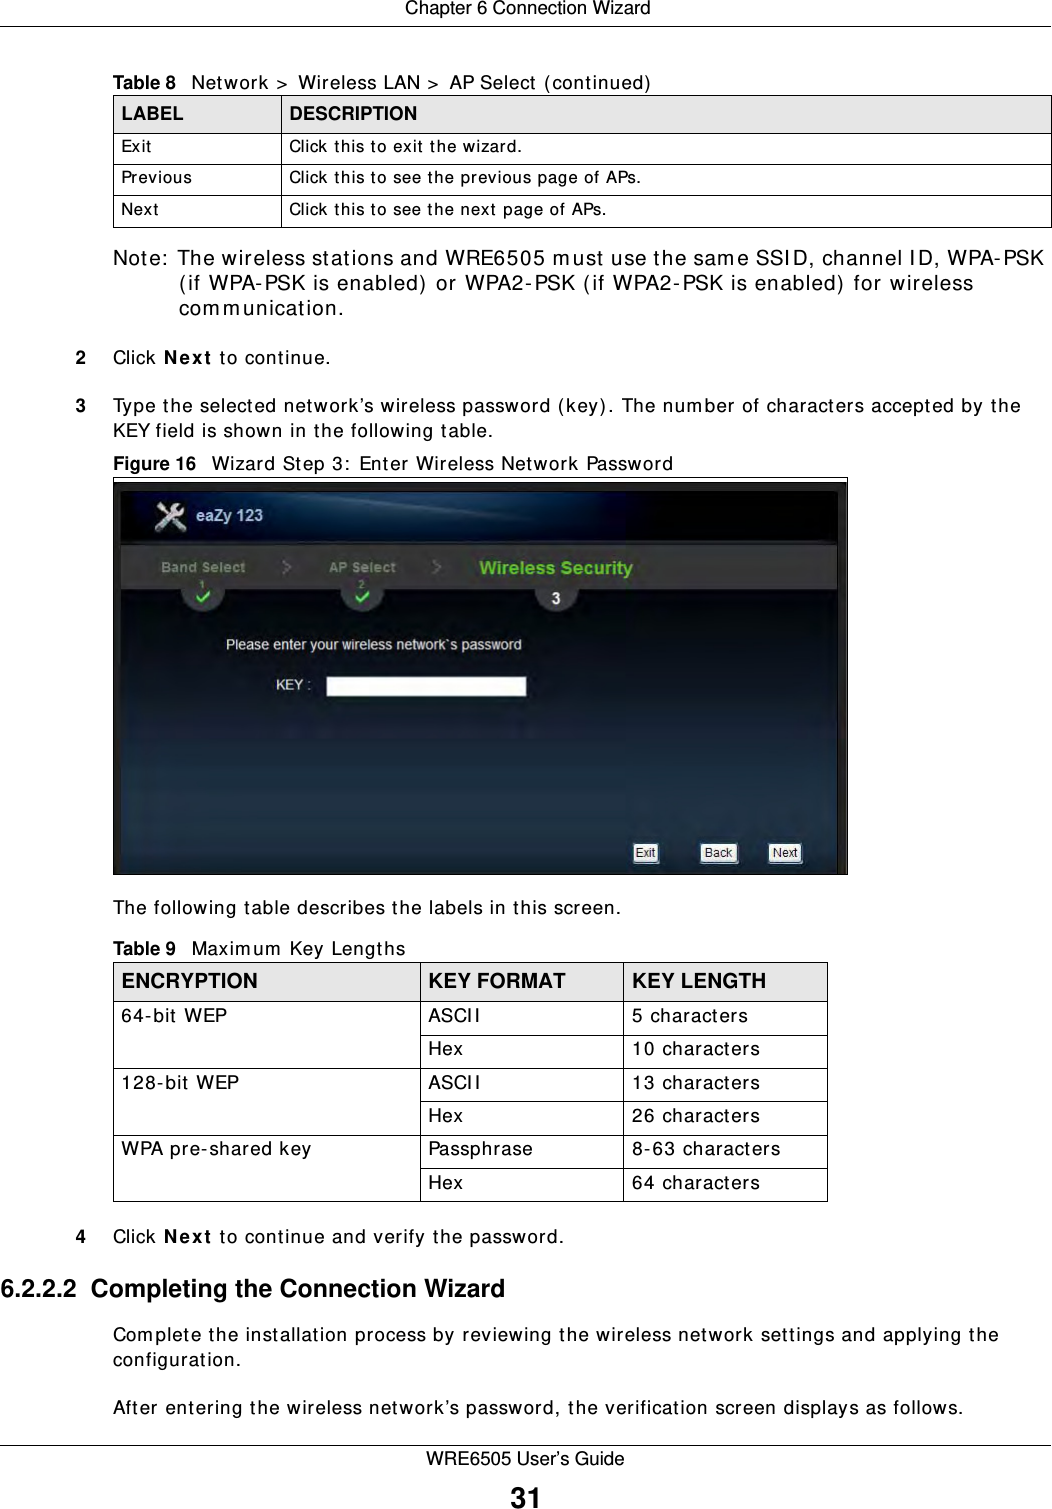  Chapter 6 Connection WizardWRE6505 User’s Guide31Note:  The wireless stations and WRE6505 m ust use the same SSID, channel I D, WPA-PSK (if WPA-PSK is enabled) or WPA2-PSK (if WPA2-PSK is enabled)  for wireless communication.2Click N e x t  to continue.3Type the selected network’s wireless password (key). The num ber of characters accepted by the KEY field is shown in the following table.Figure 16   Wizard Step 3:  Enter Wireless Network Password The following table describes the labels in this screen.4Click N e x t  to continue and verify the password.6.2.2.2  Completing the Connection WizardCom plete the installation process by reviewing the wireless network settings and applying the configuration.After entering the wireless network’s password, the verification screen displays as follows.Exit Click this to exit the wizard.Previous Click this to see the previous page of APs.Next Click this to see the next page of APs.Table 8   Network &gt;  Wireless LAN &gt;  AP Select (continued)LABEL DESCRIPTIONTable 9   Maxim um Key LengthsENCRYPTION KEY FORMAT KEY LENGTH64-bit WEP ASCII 5 charactersHex 10 characters128-bit WEP ASCII 13 charactersHex 26 charactersWPA pre-shared key Passphrase 8-63 charactersHex 64 characters